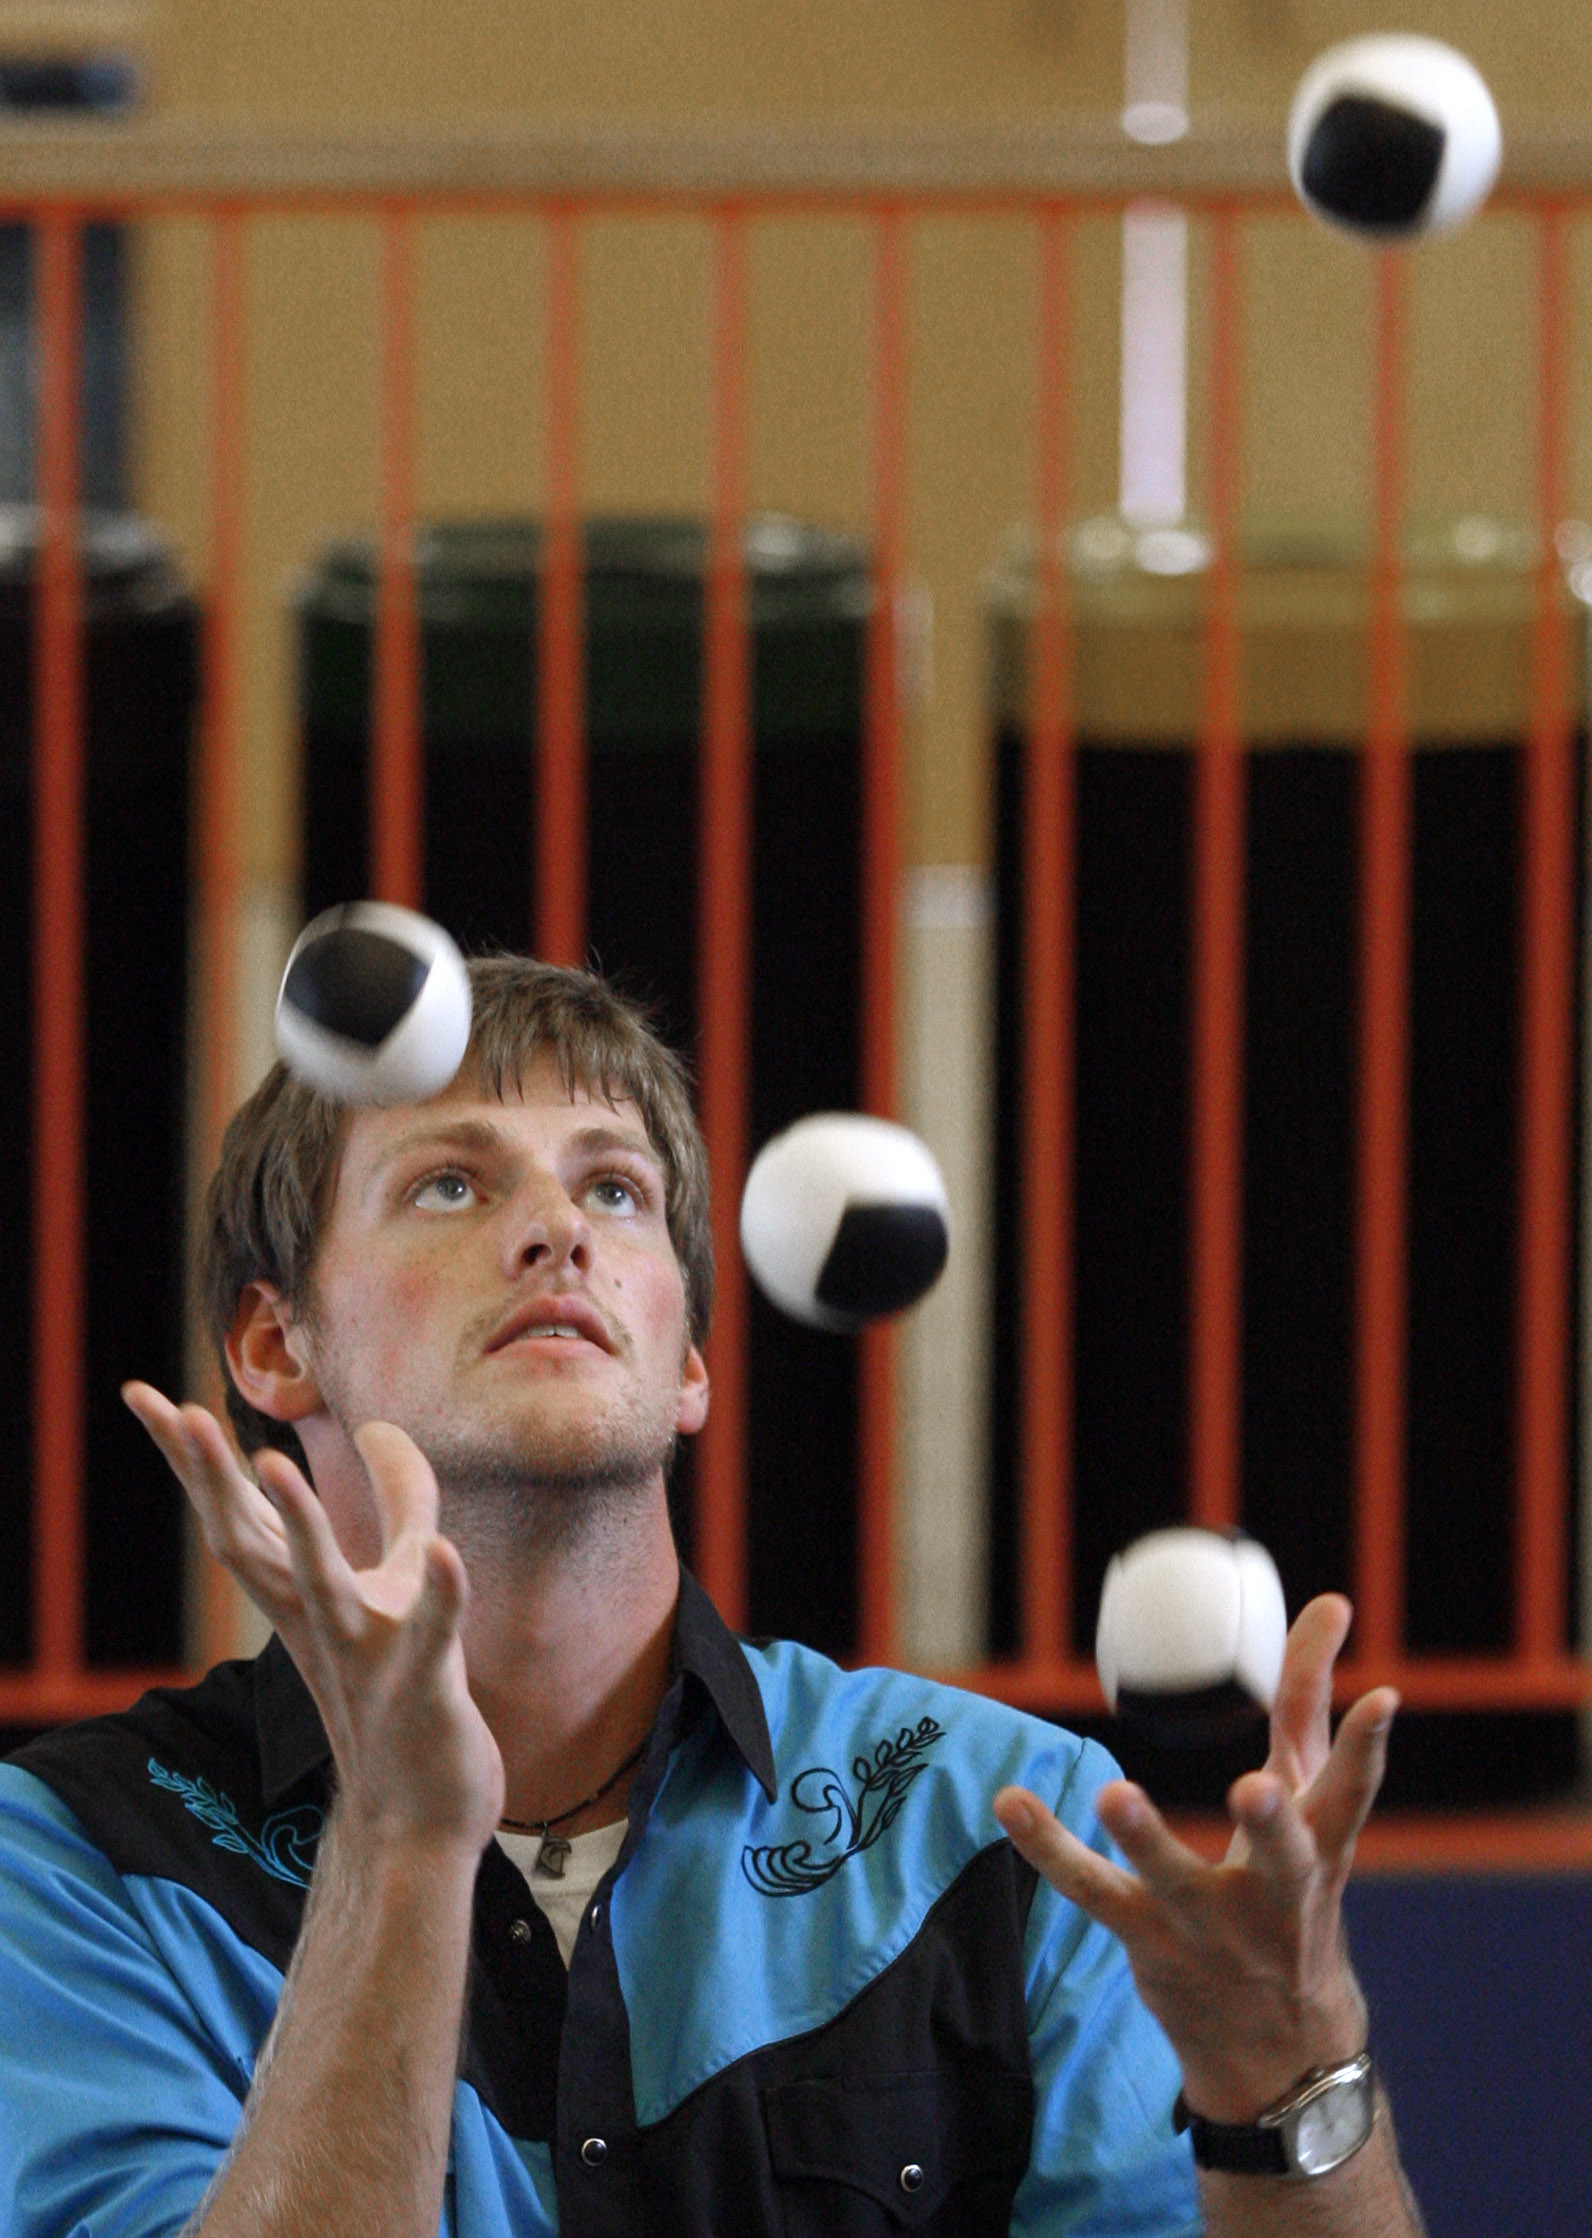 Juggling enthusiasts hope skill catches on - The Blade